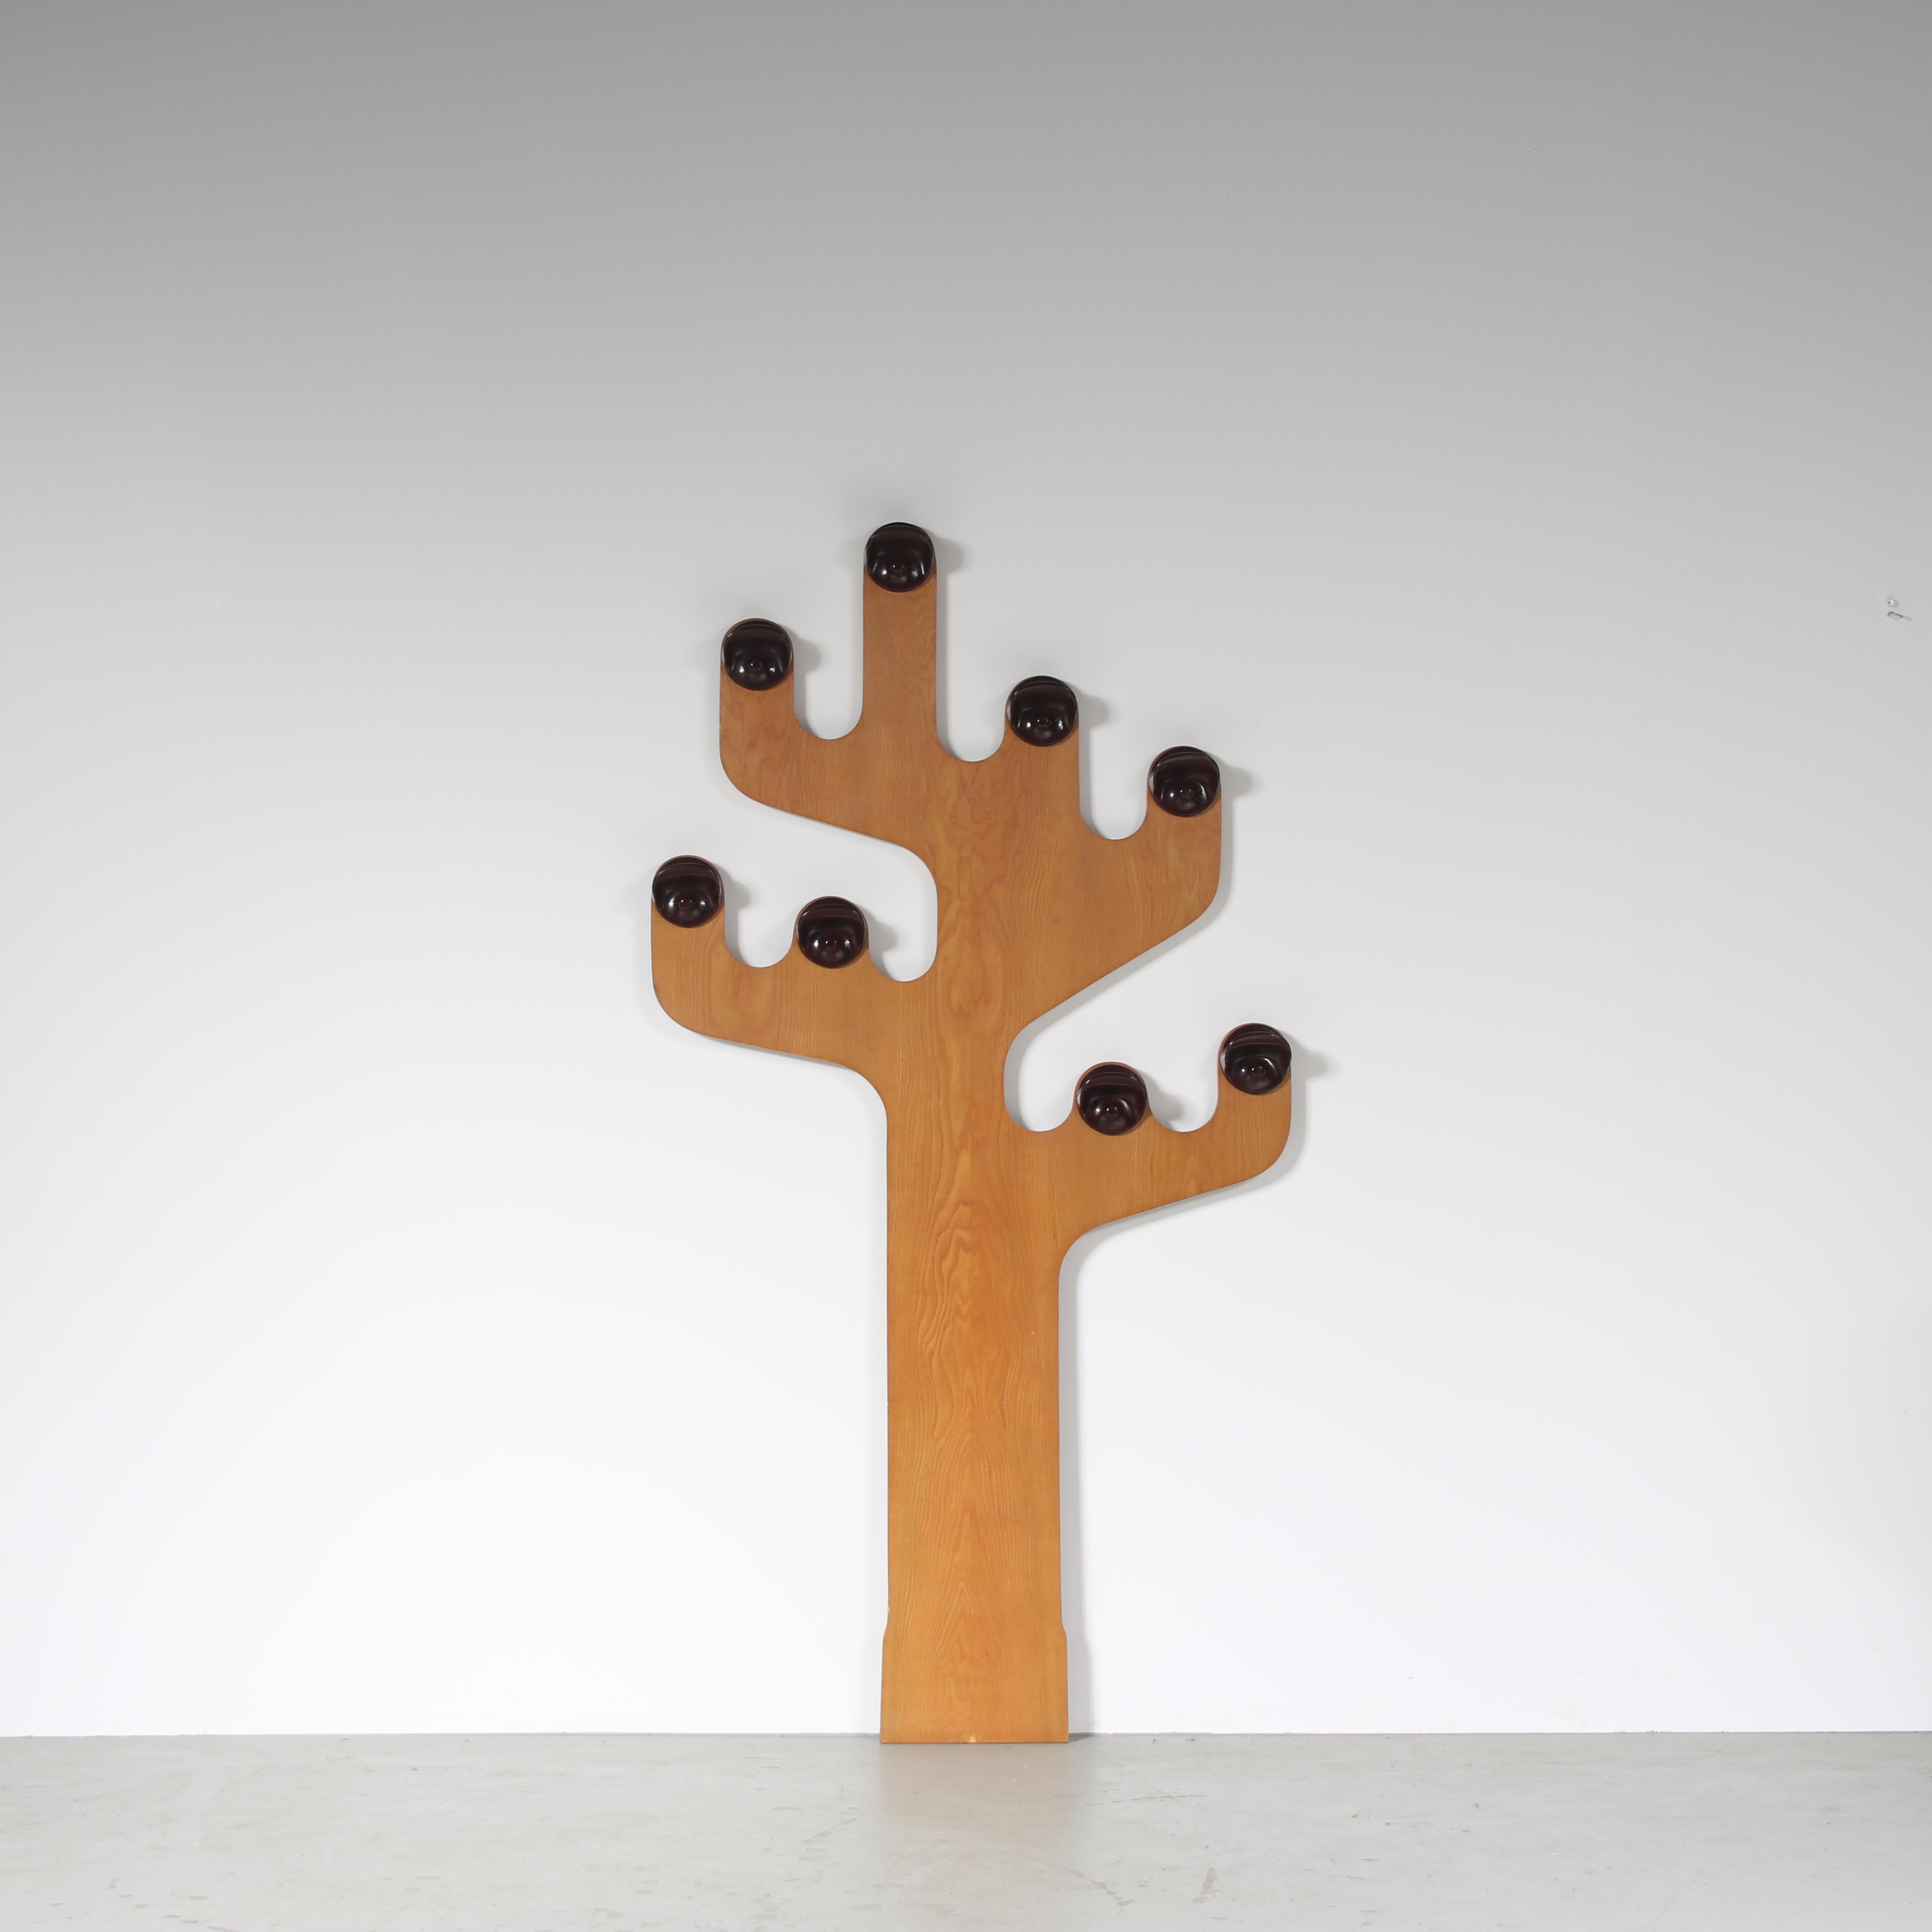 A pop-art style coat rack designed by Olaf Von Bohr, manufactured by Kartell in Italy around 1970.

A very unique and distinctive piece! Made of brown wood with a lovely natural nerve, designed in the shape of a tree. It holds several dark brown